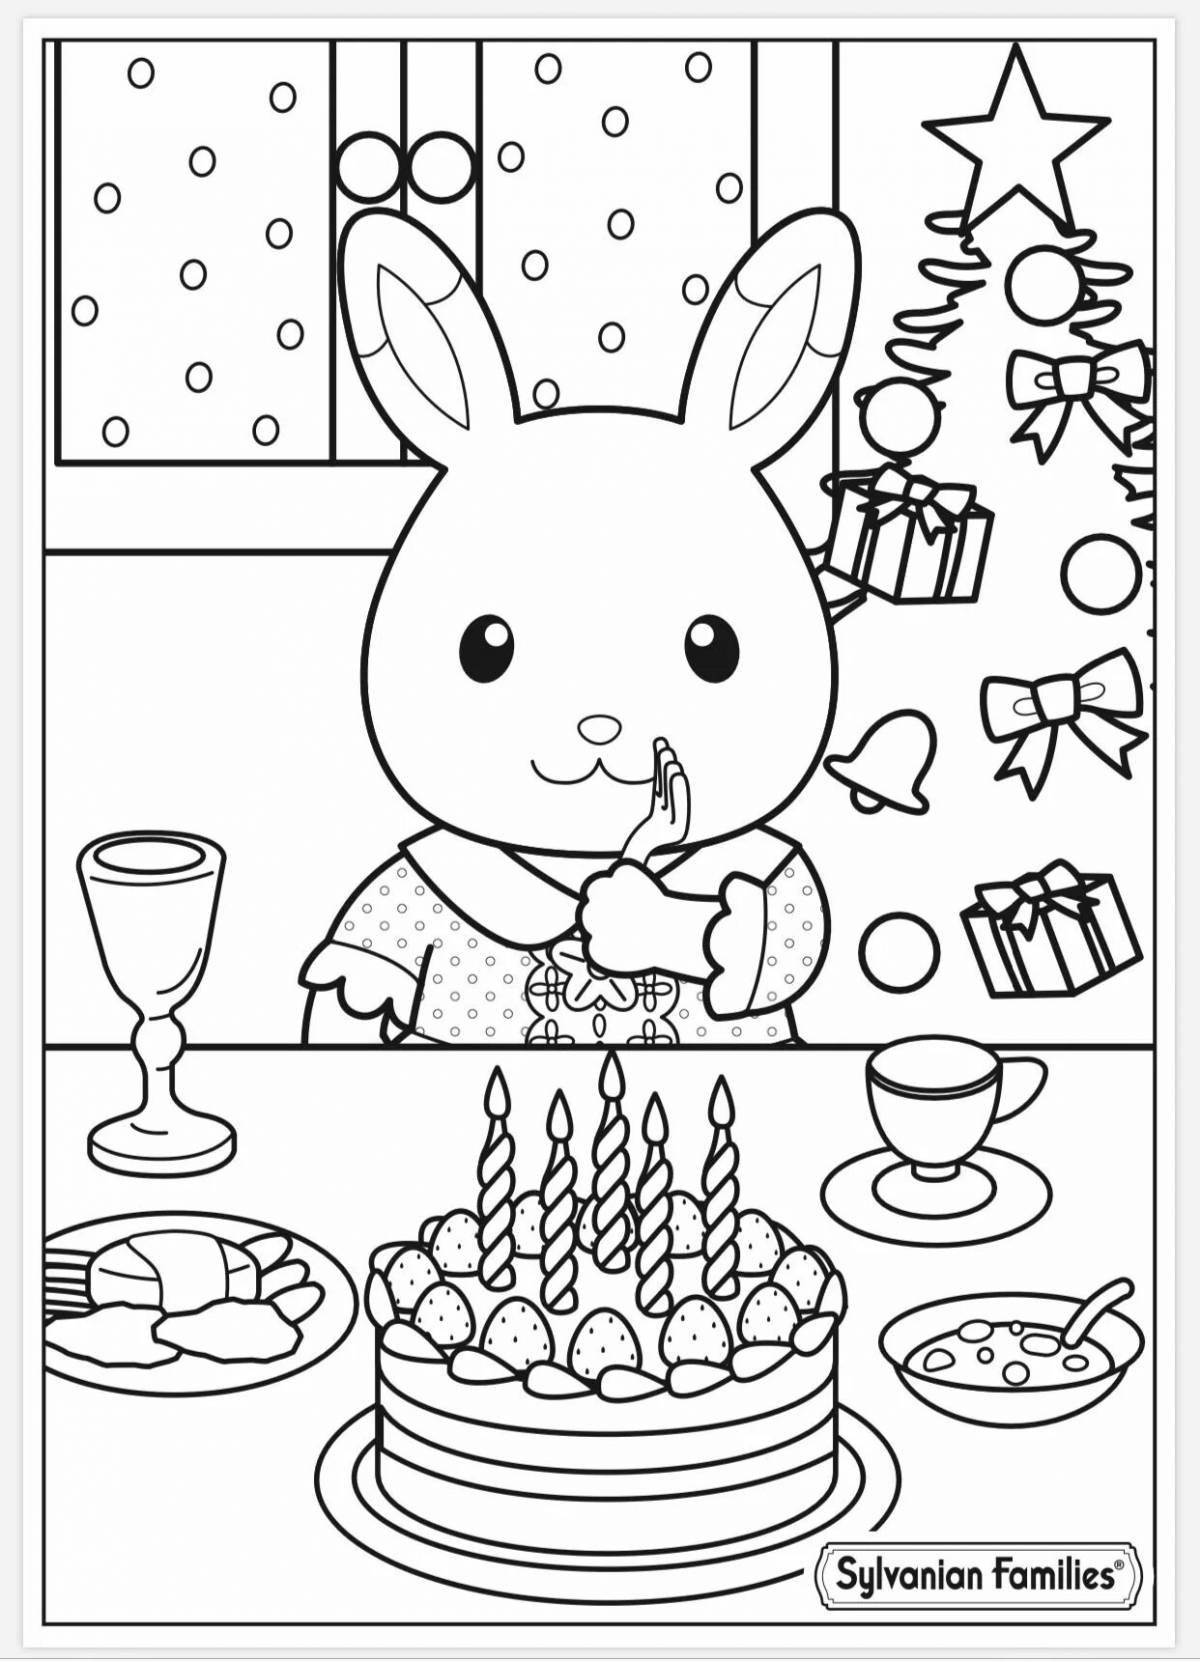 Colorful sylvanian families coloring page